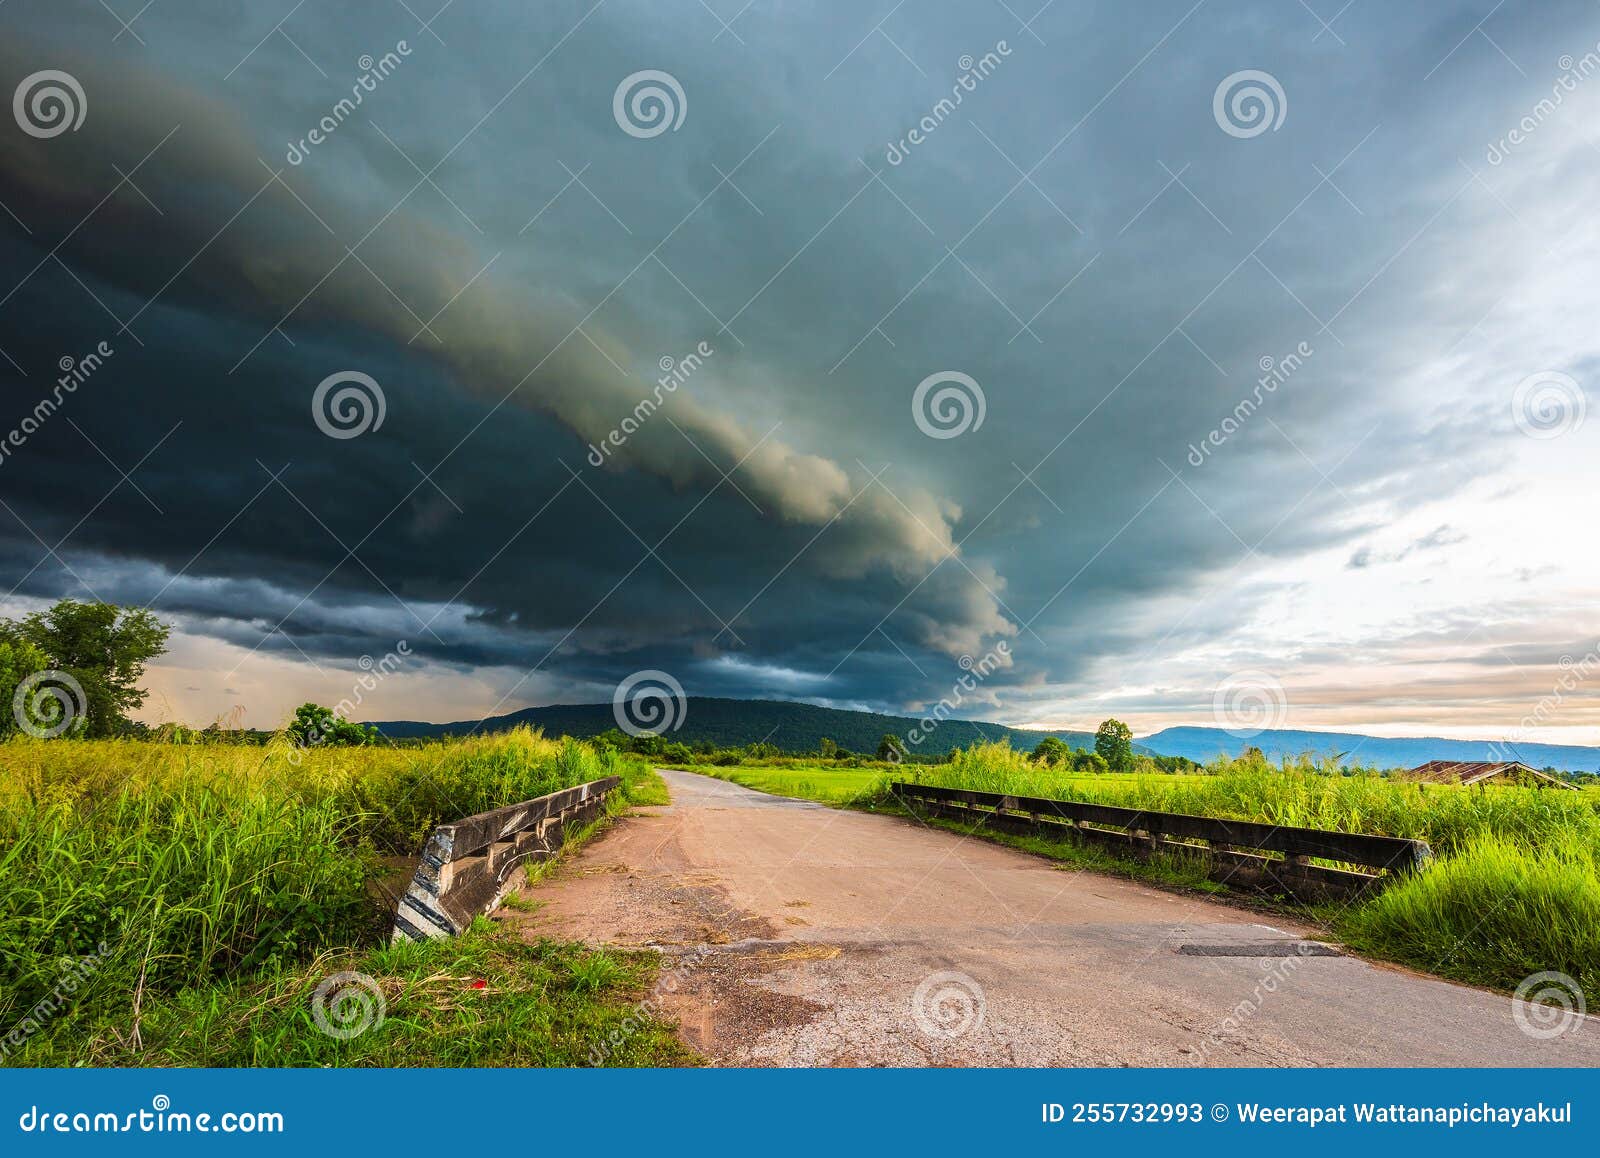 arcus clouds over the country road